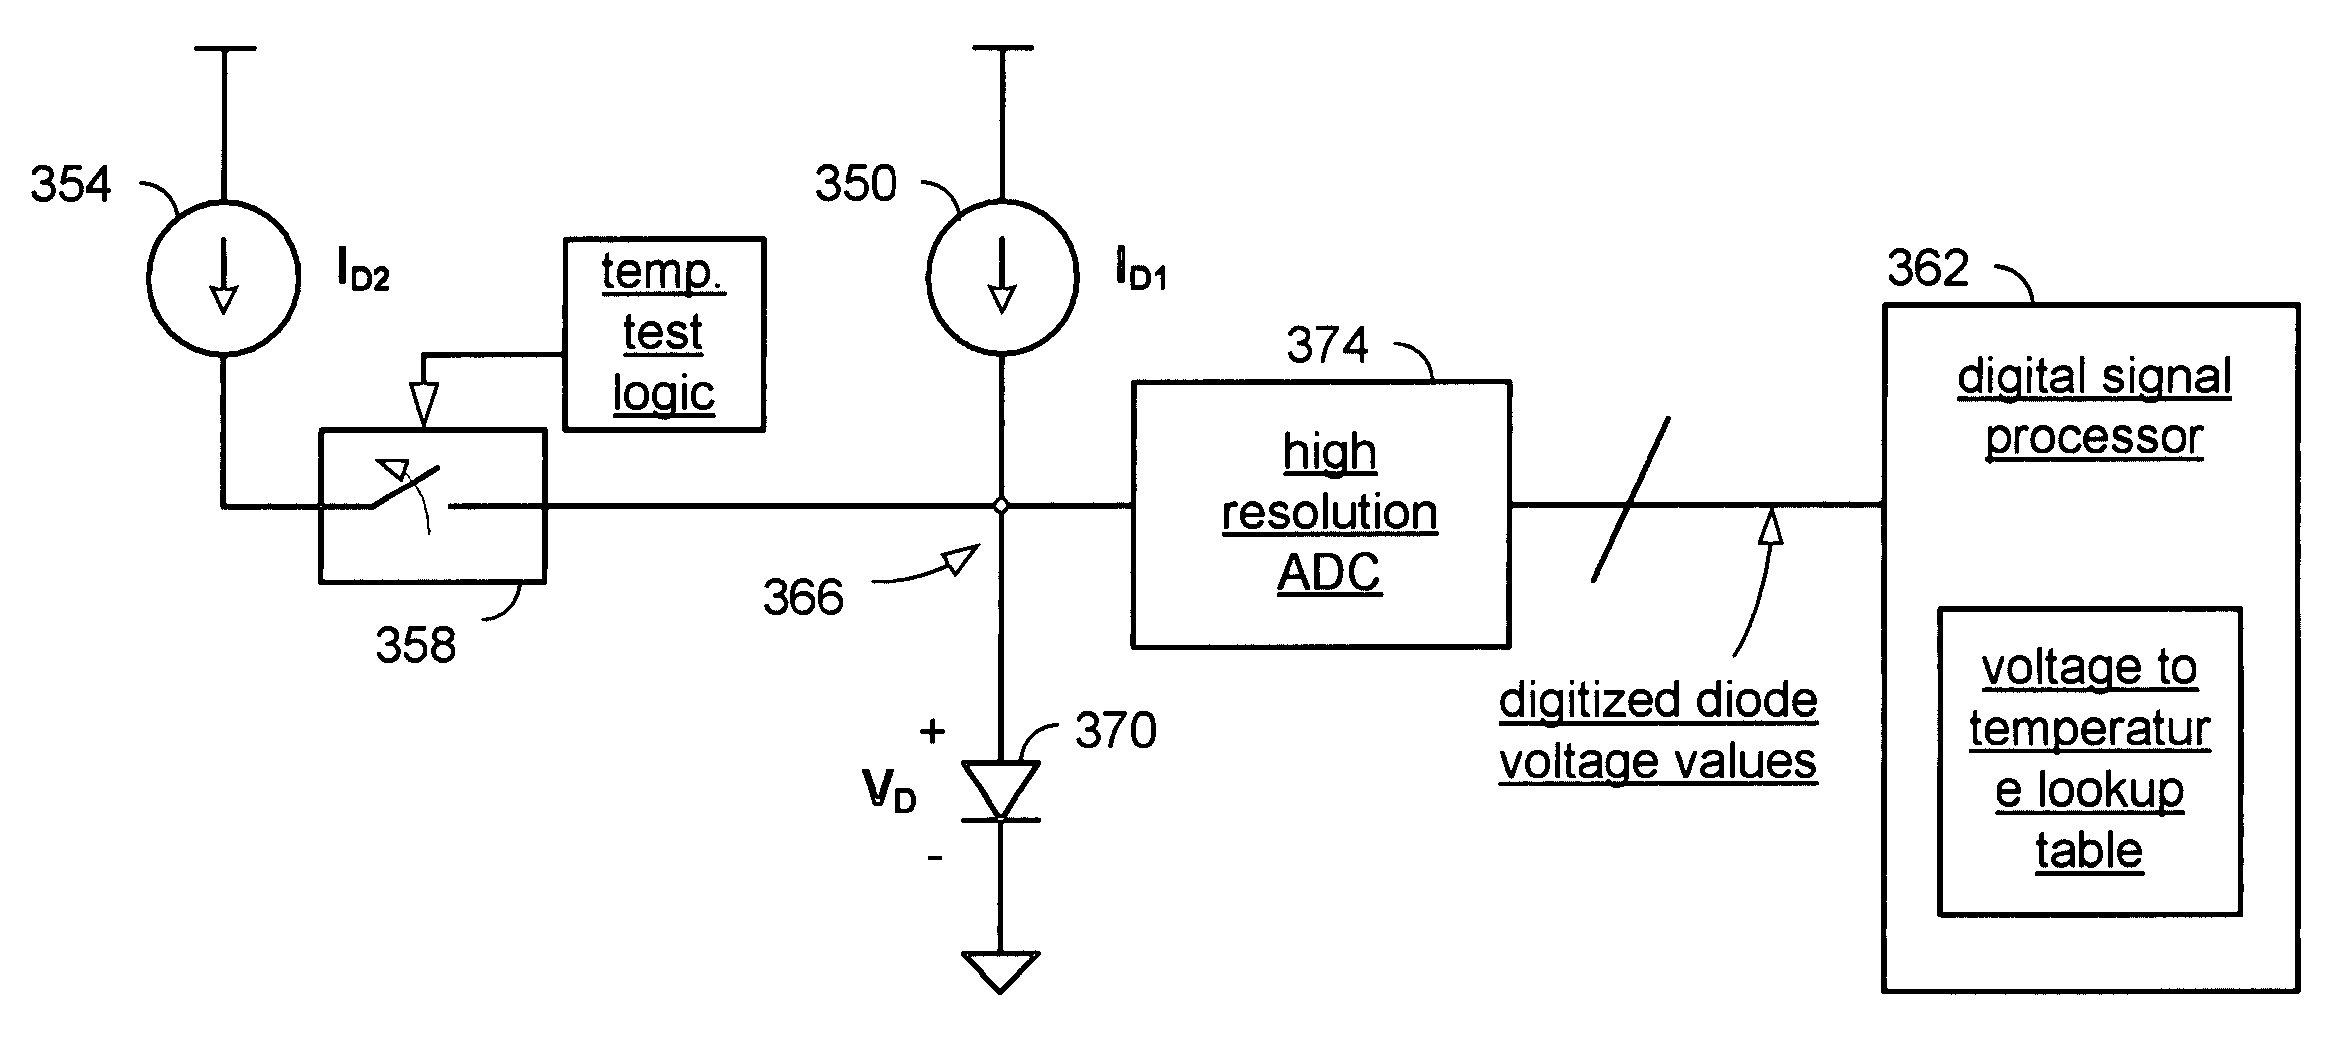 Highly accurate temperature sensor employing mixed-signal components